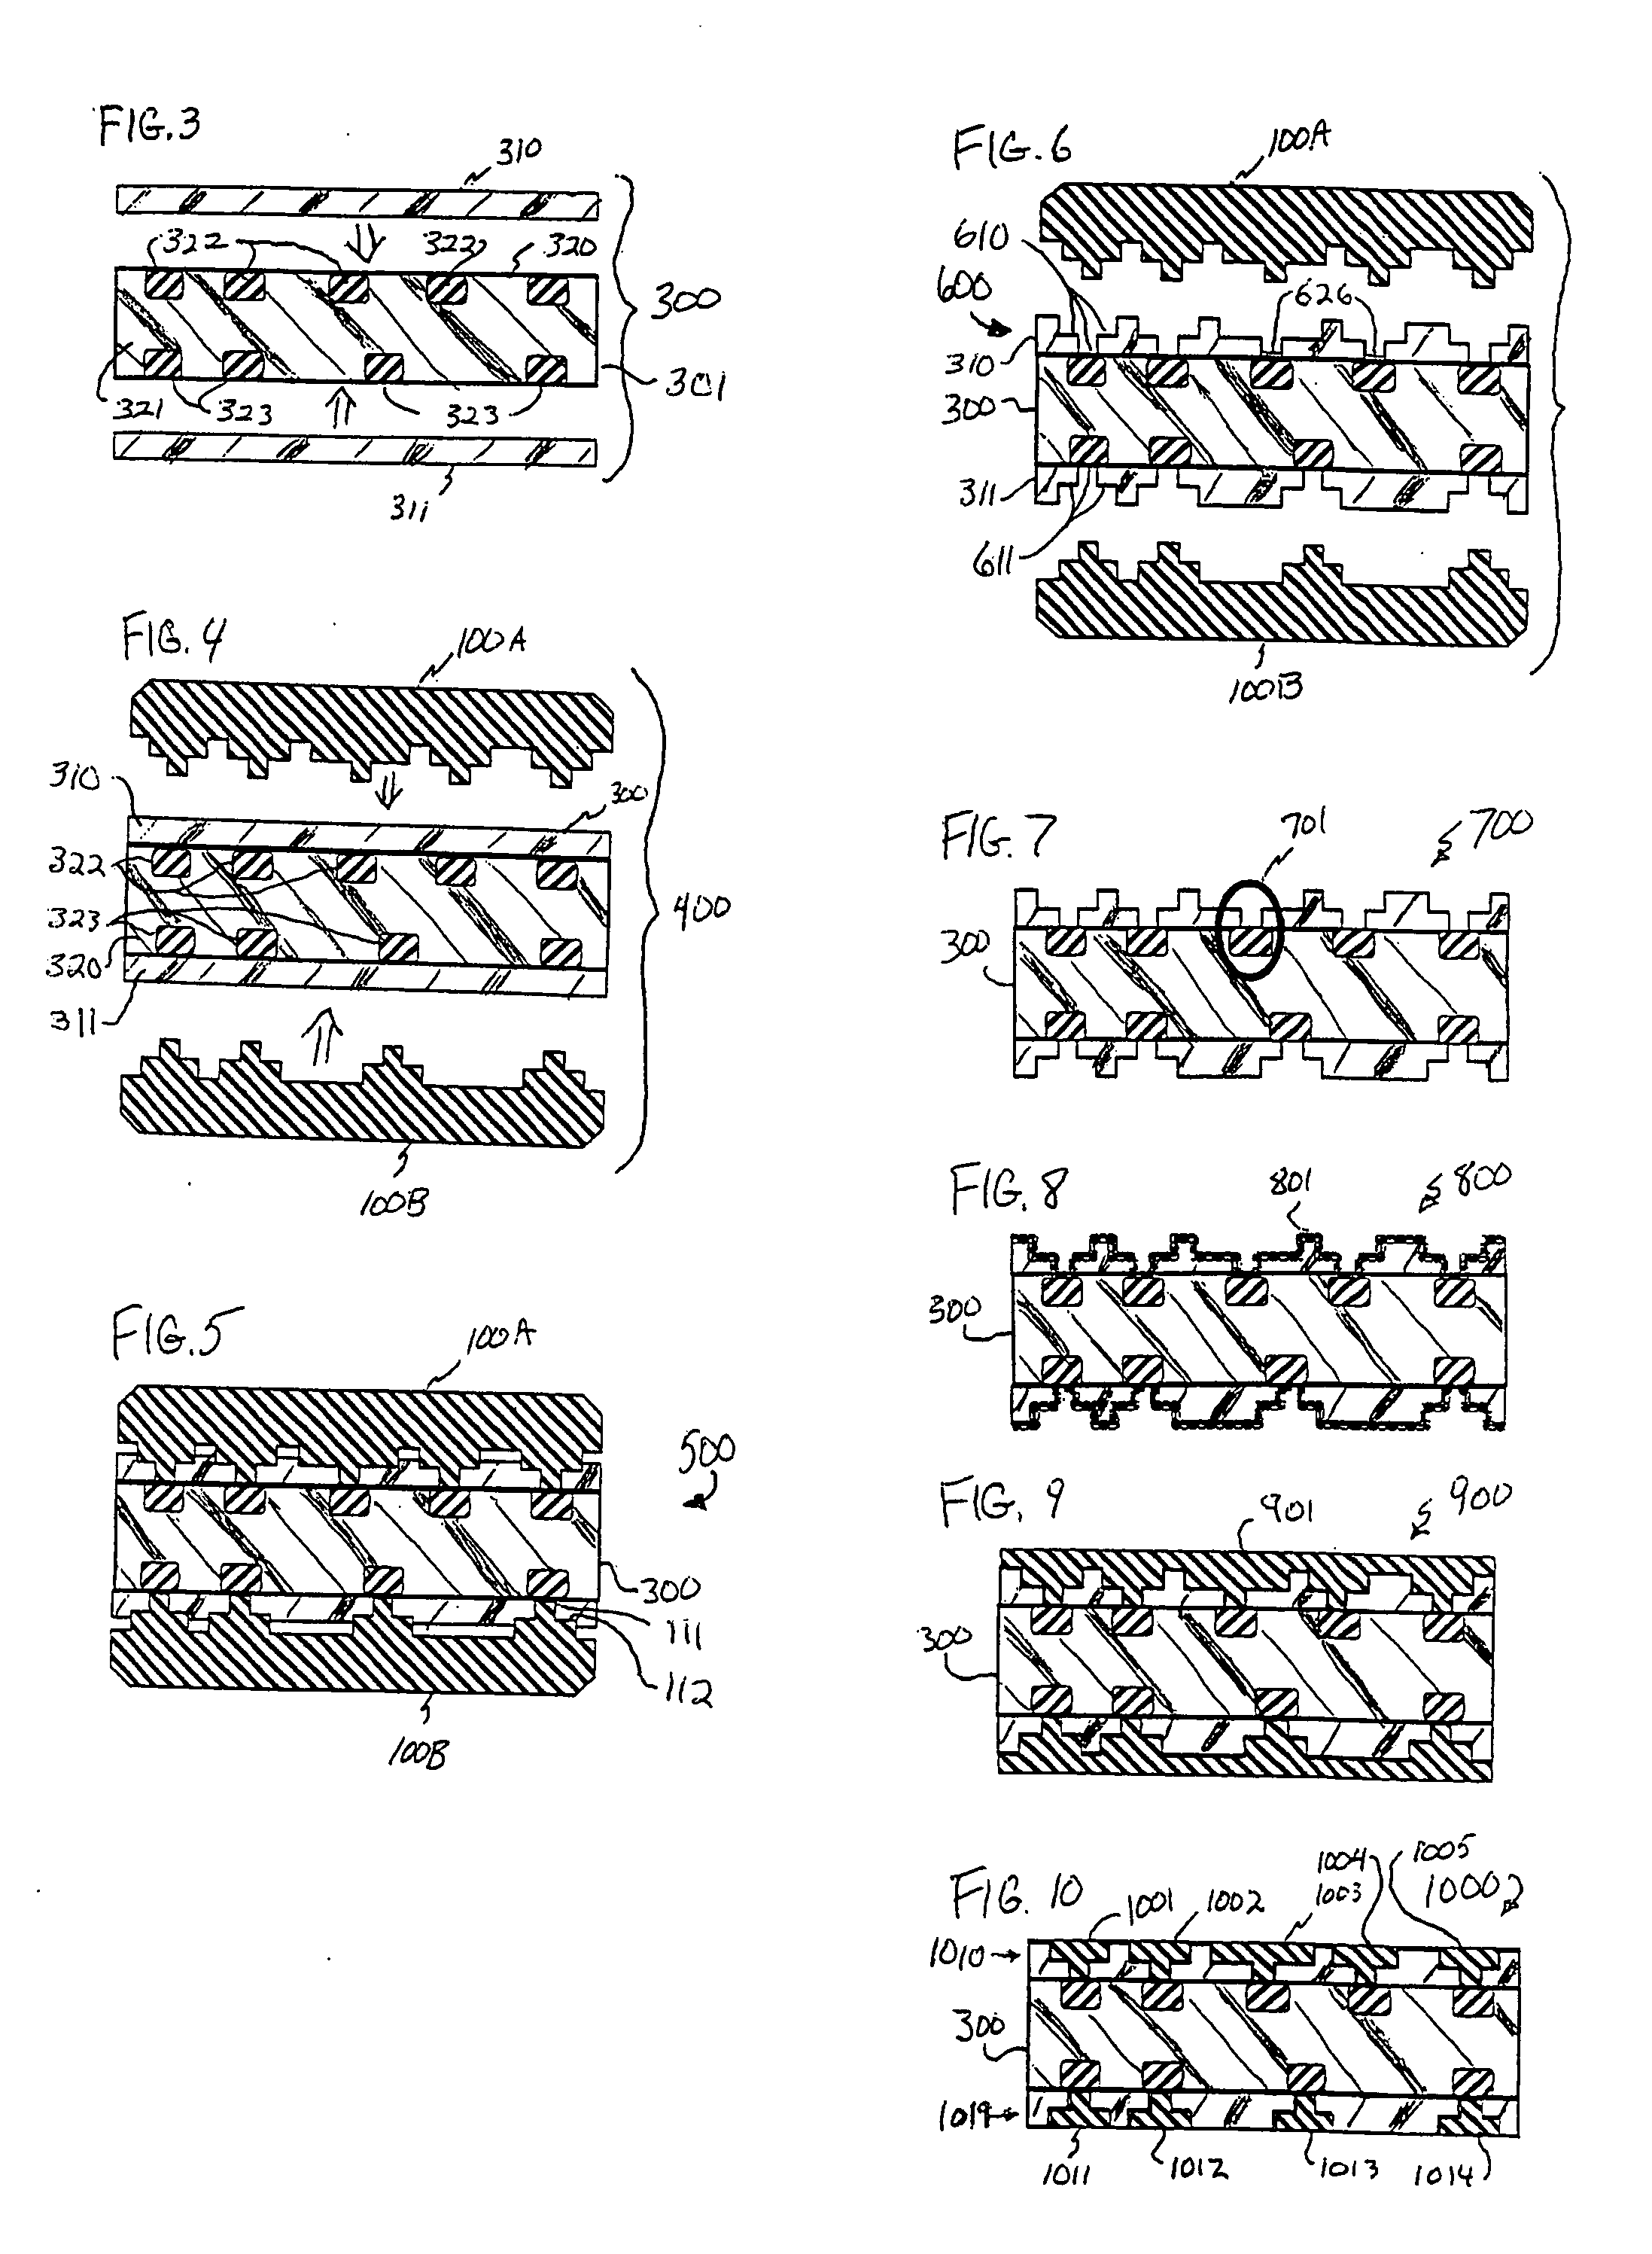 Component packaging apparatus, systems, and methods